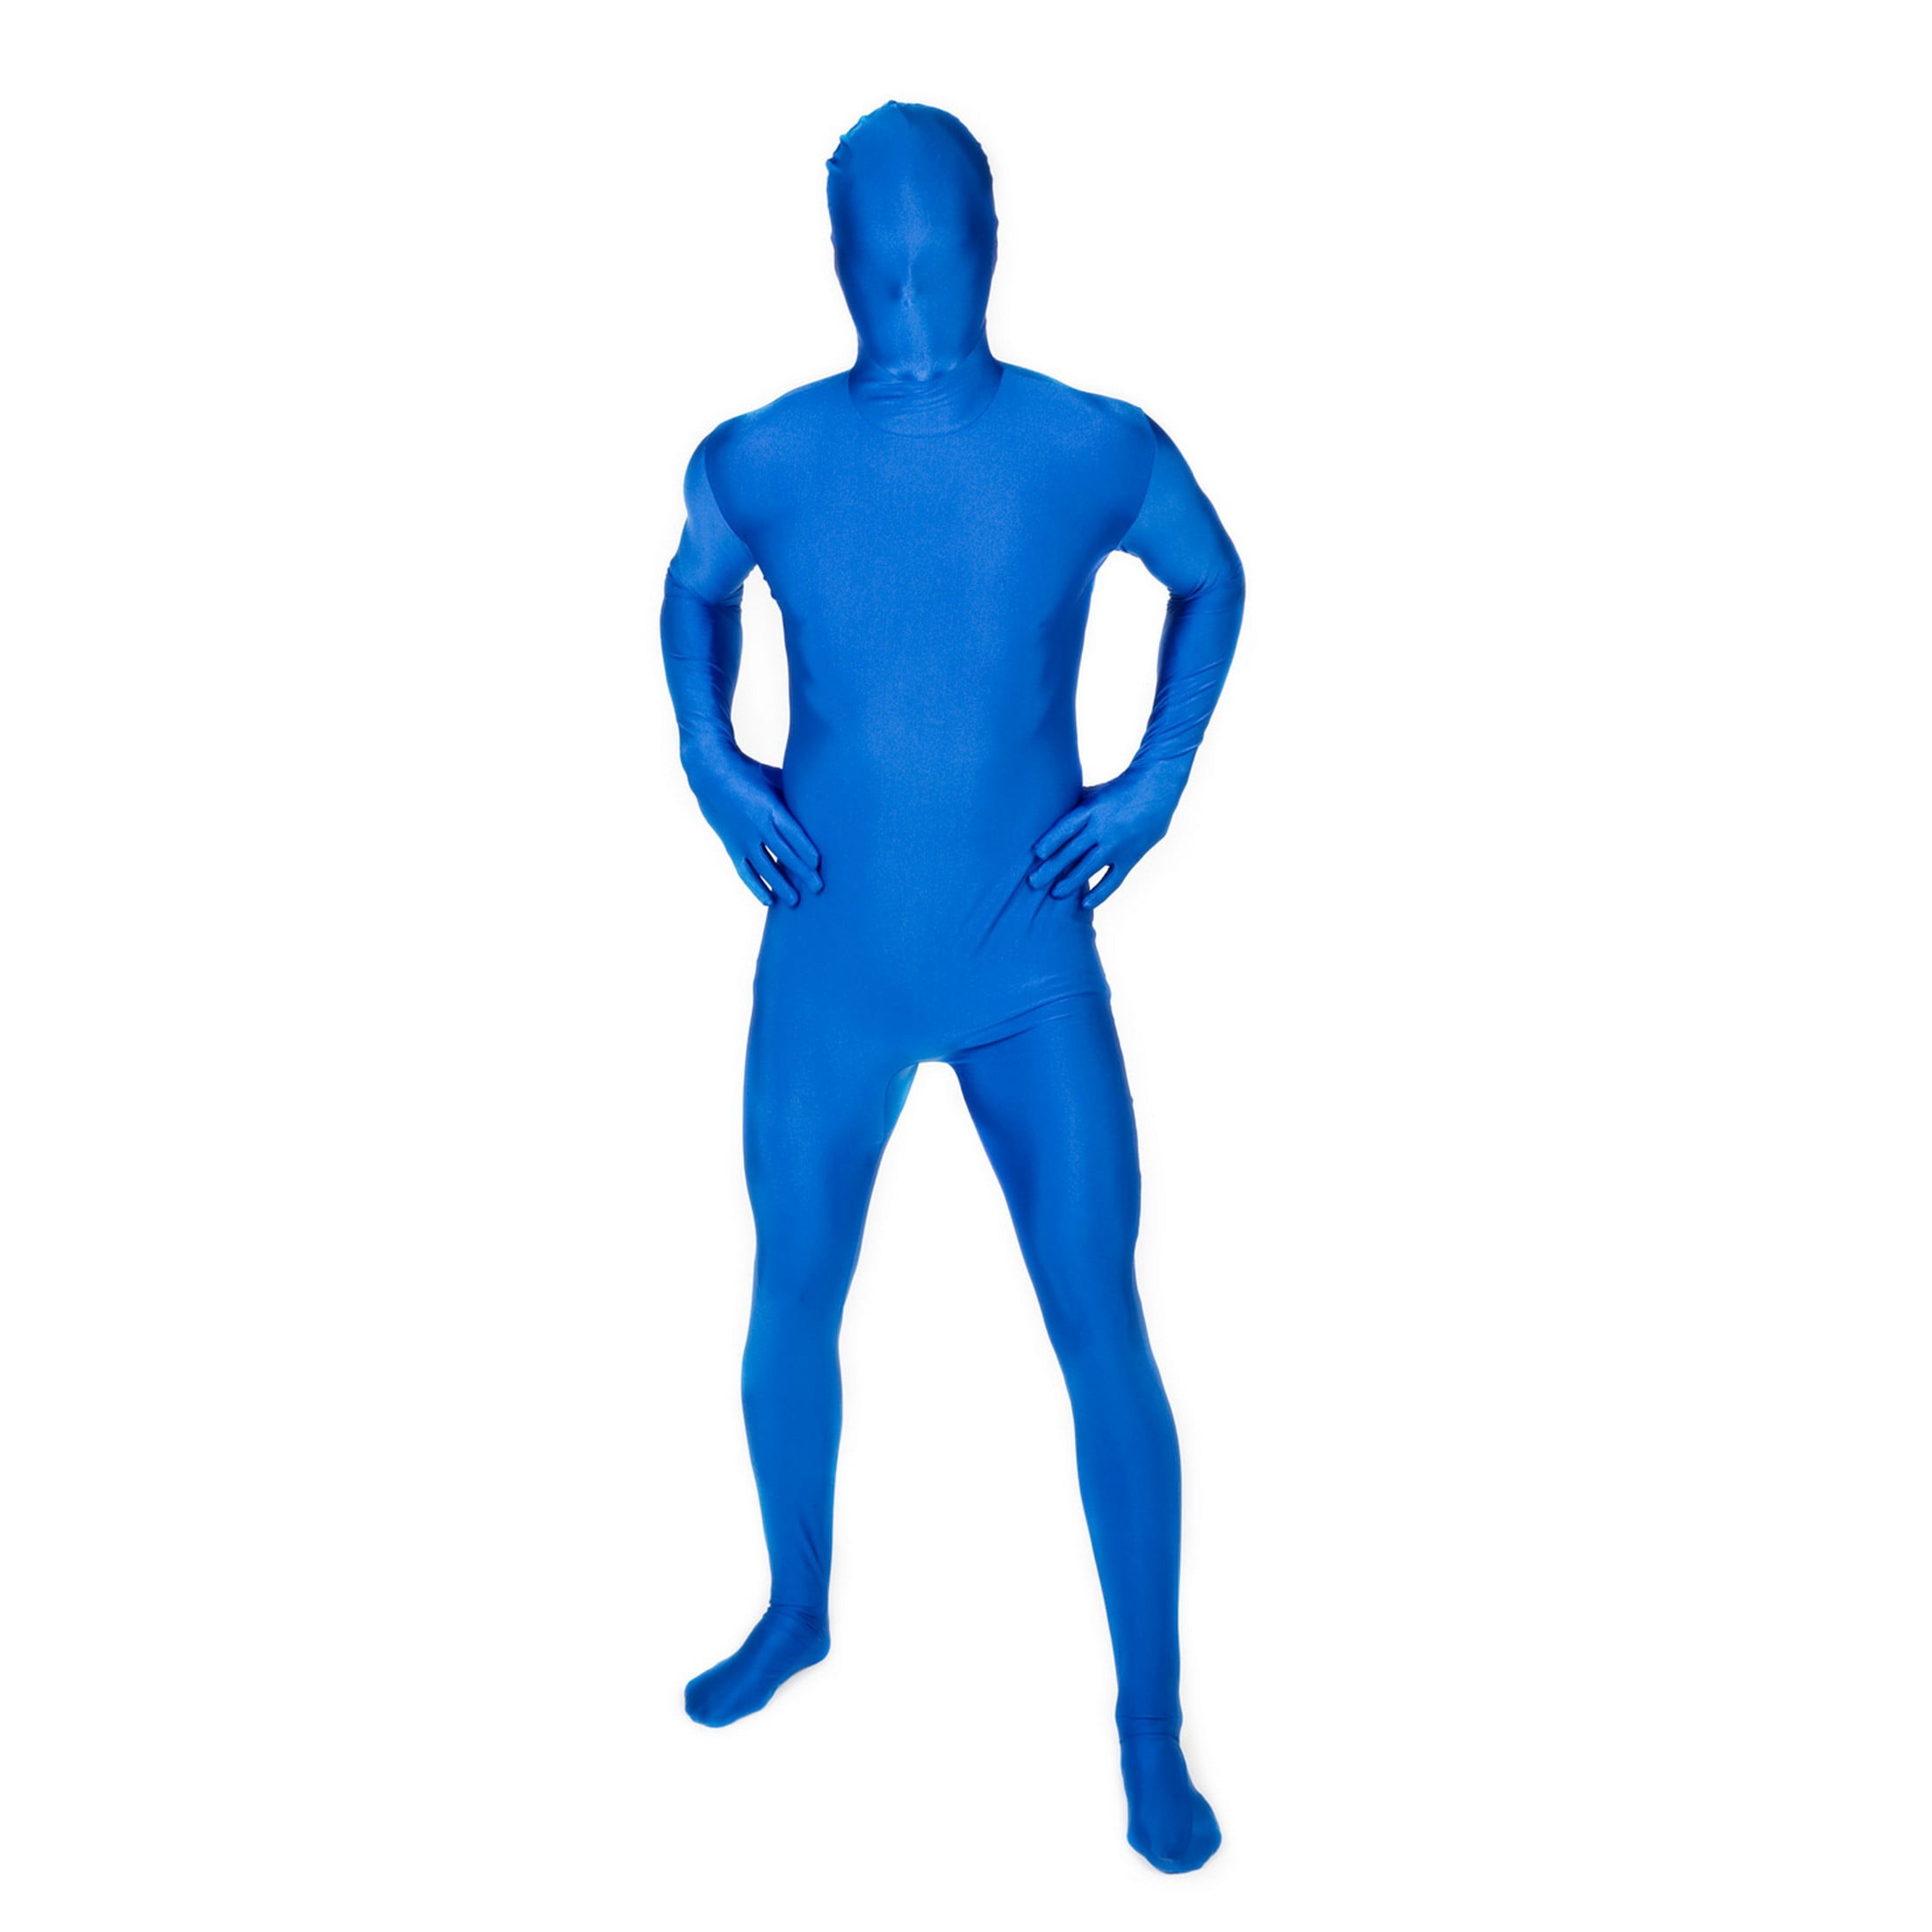 Morphsuits Morphsuits Morph Suit Fancy Dress Costume Blue XL Festival Stag Do Prom 